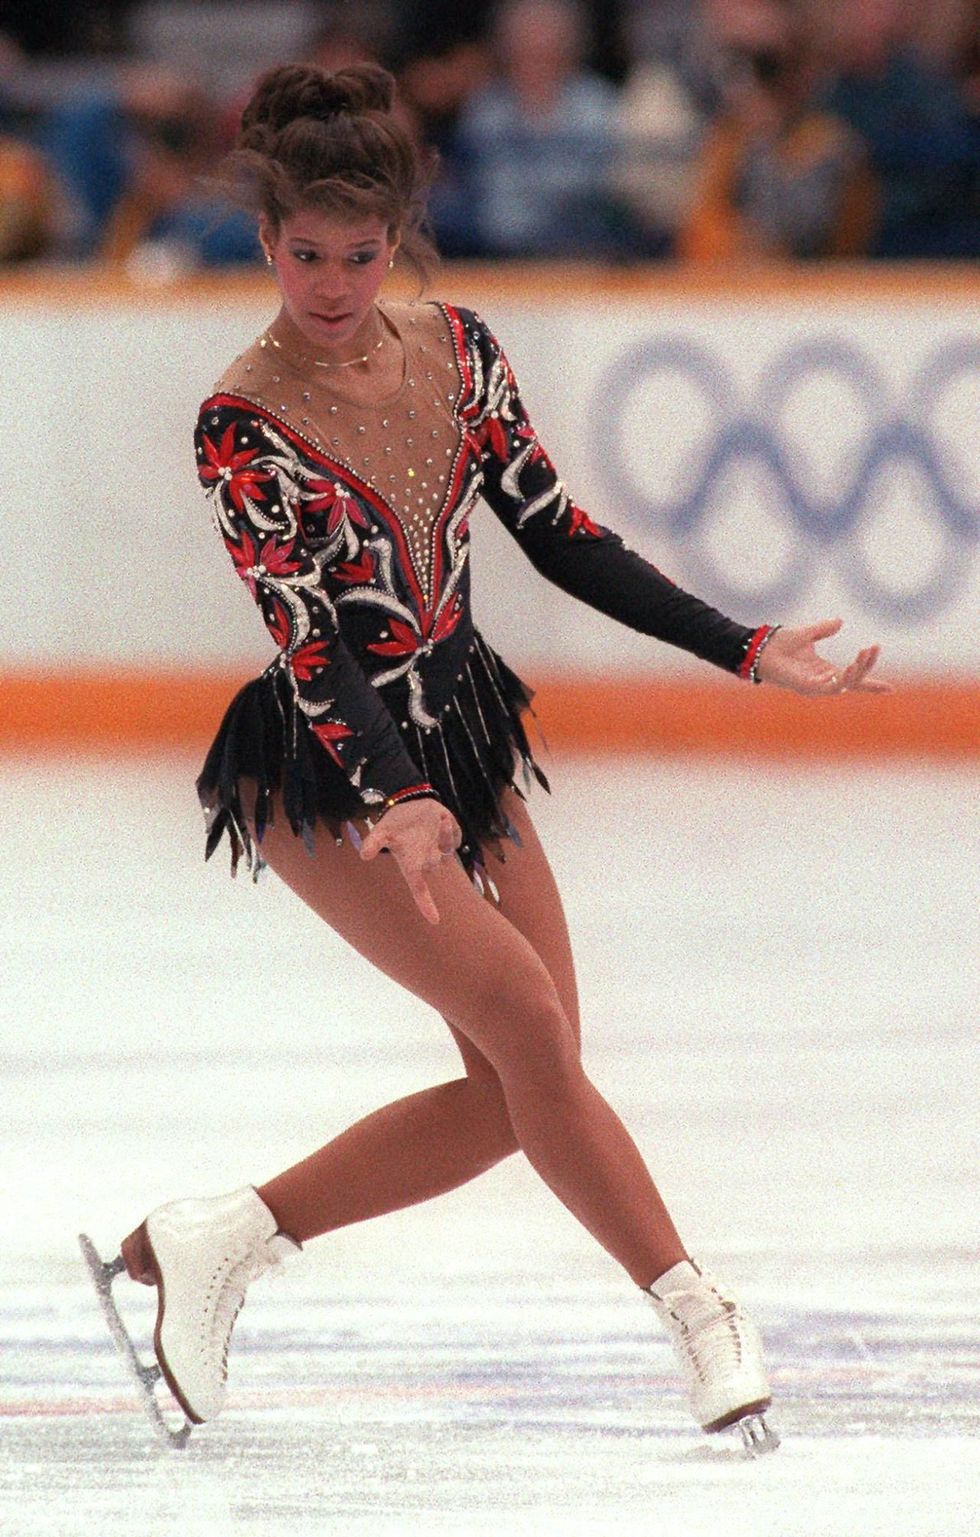 Human leg, Joint, Ice skate, Knee, Thigh, Sports, Youth, Trunk, Competition, Waist, 